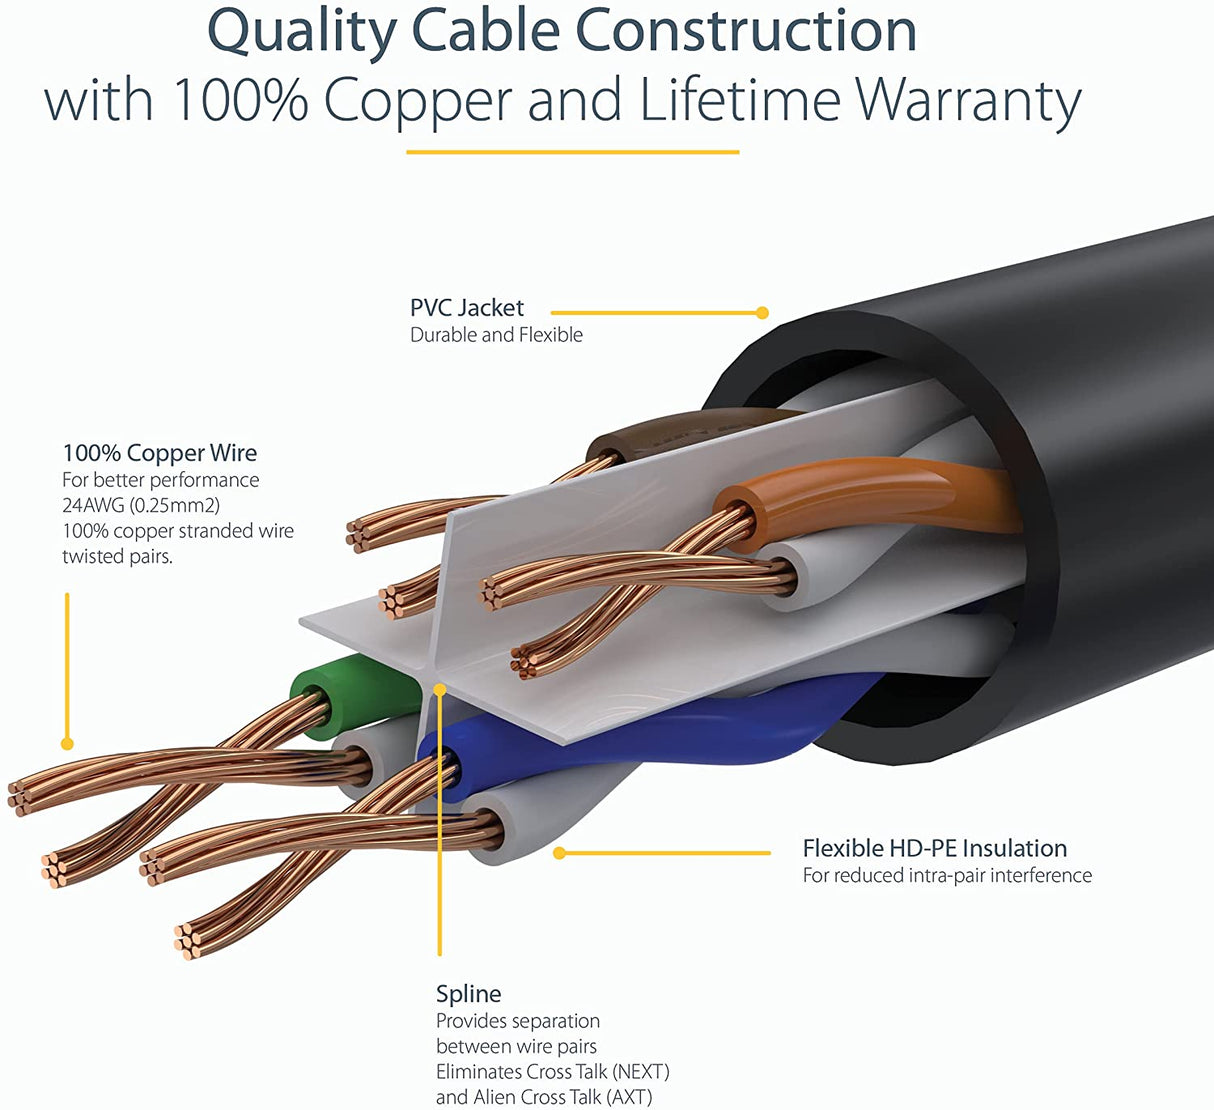 StarTech.com 35ft CAT6 Ethernet Cable - Black CAT 6 Gigabit Ethernet Wire -650MHz 100W PoE++ RJ45 UTP Molded Category 6 Network/Patch Cord w/Strain Relief/Fluke Tested UL/TIA Certified (C6PATCH35BK) Black 35 ft / 10.6 m 1 Pack